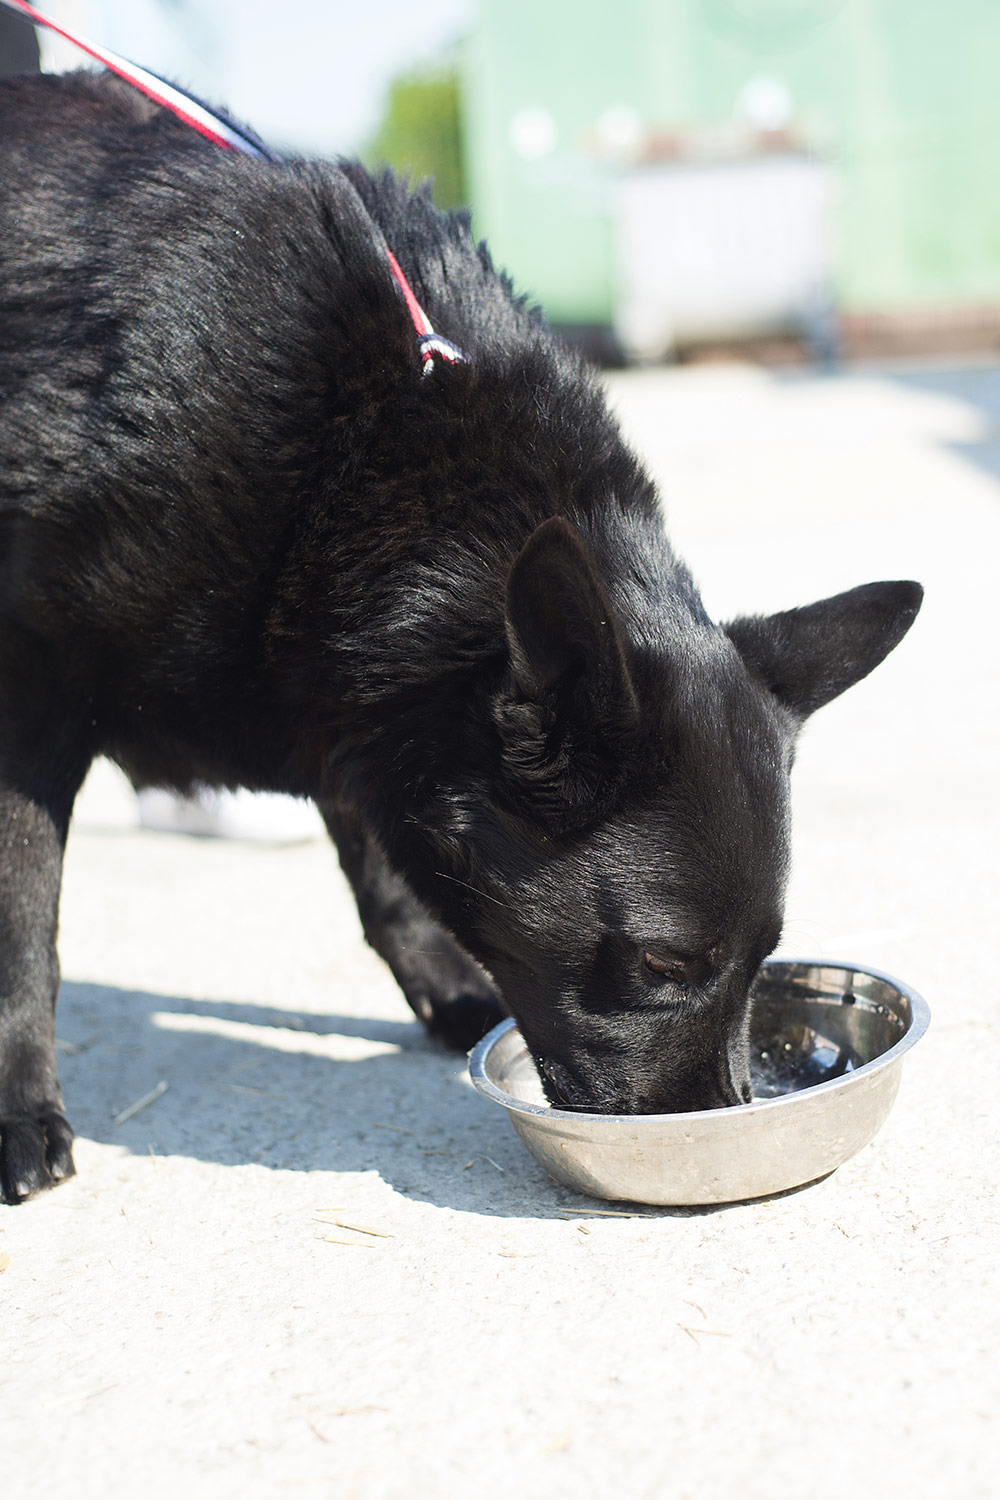 To remove hard-water stains from your dog’s water bowl, pour heated vinegar inside it